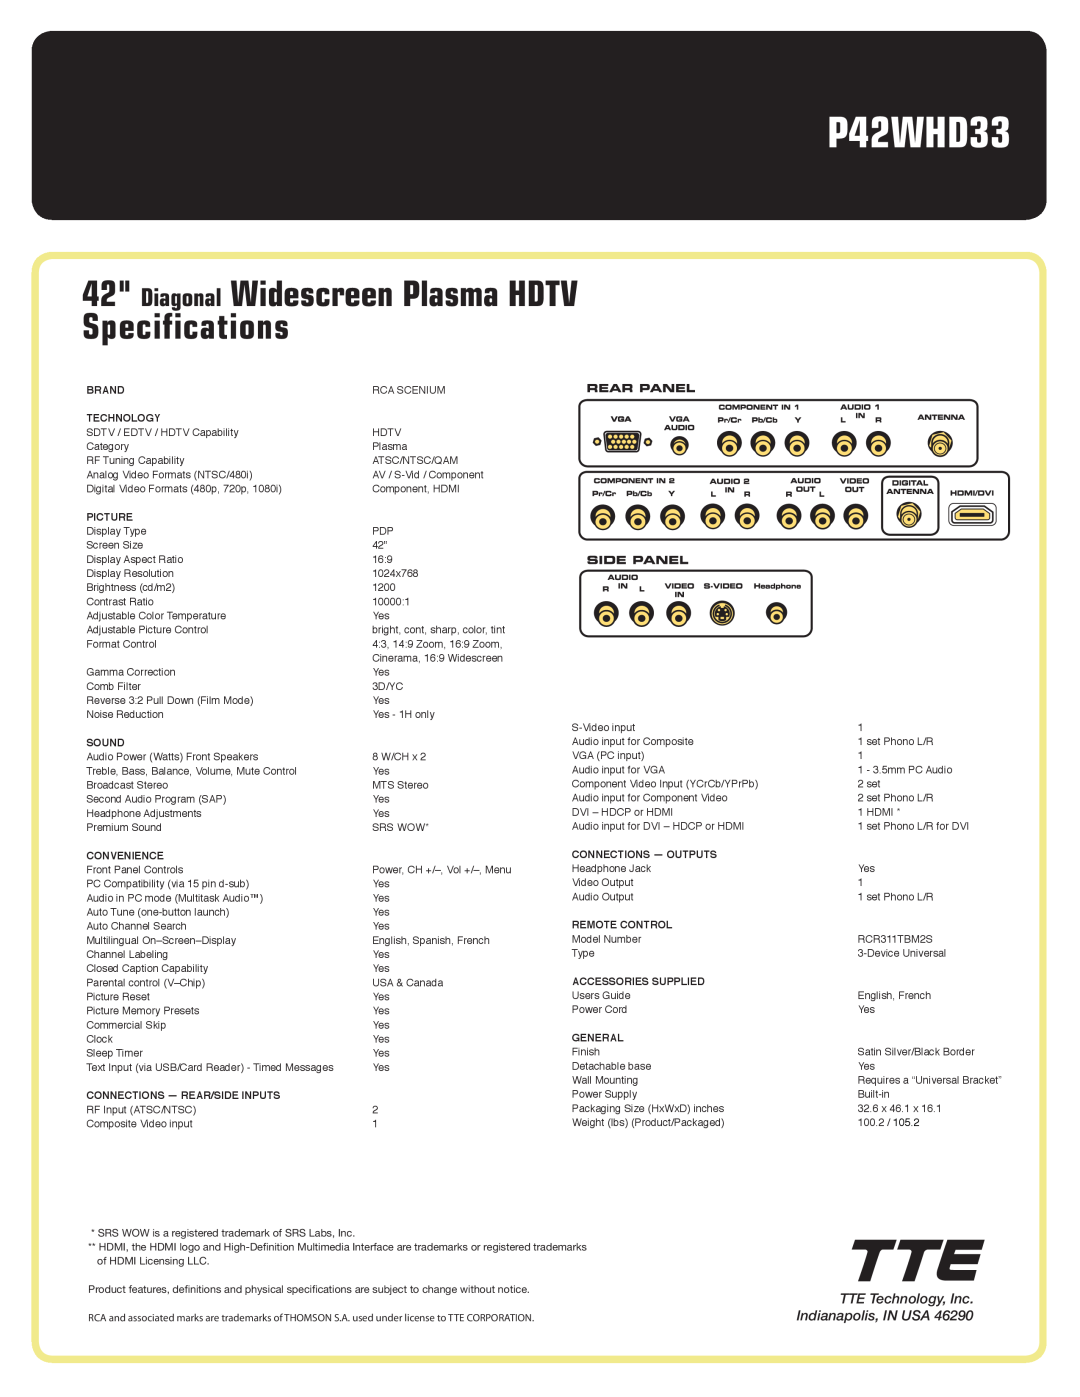 RCA P42WHD33 manual Diagonal Widescreen Plasma HDTV Specifications, TTE Technology, Inc. Indianapolis, IN USA 